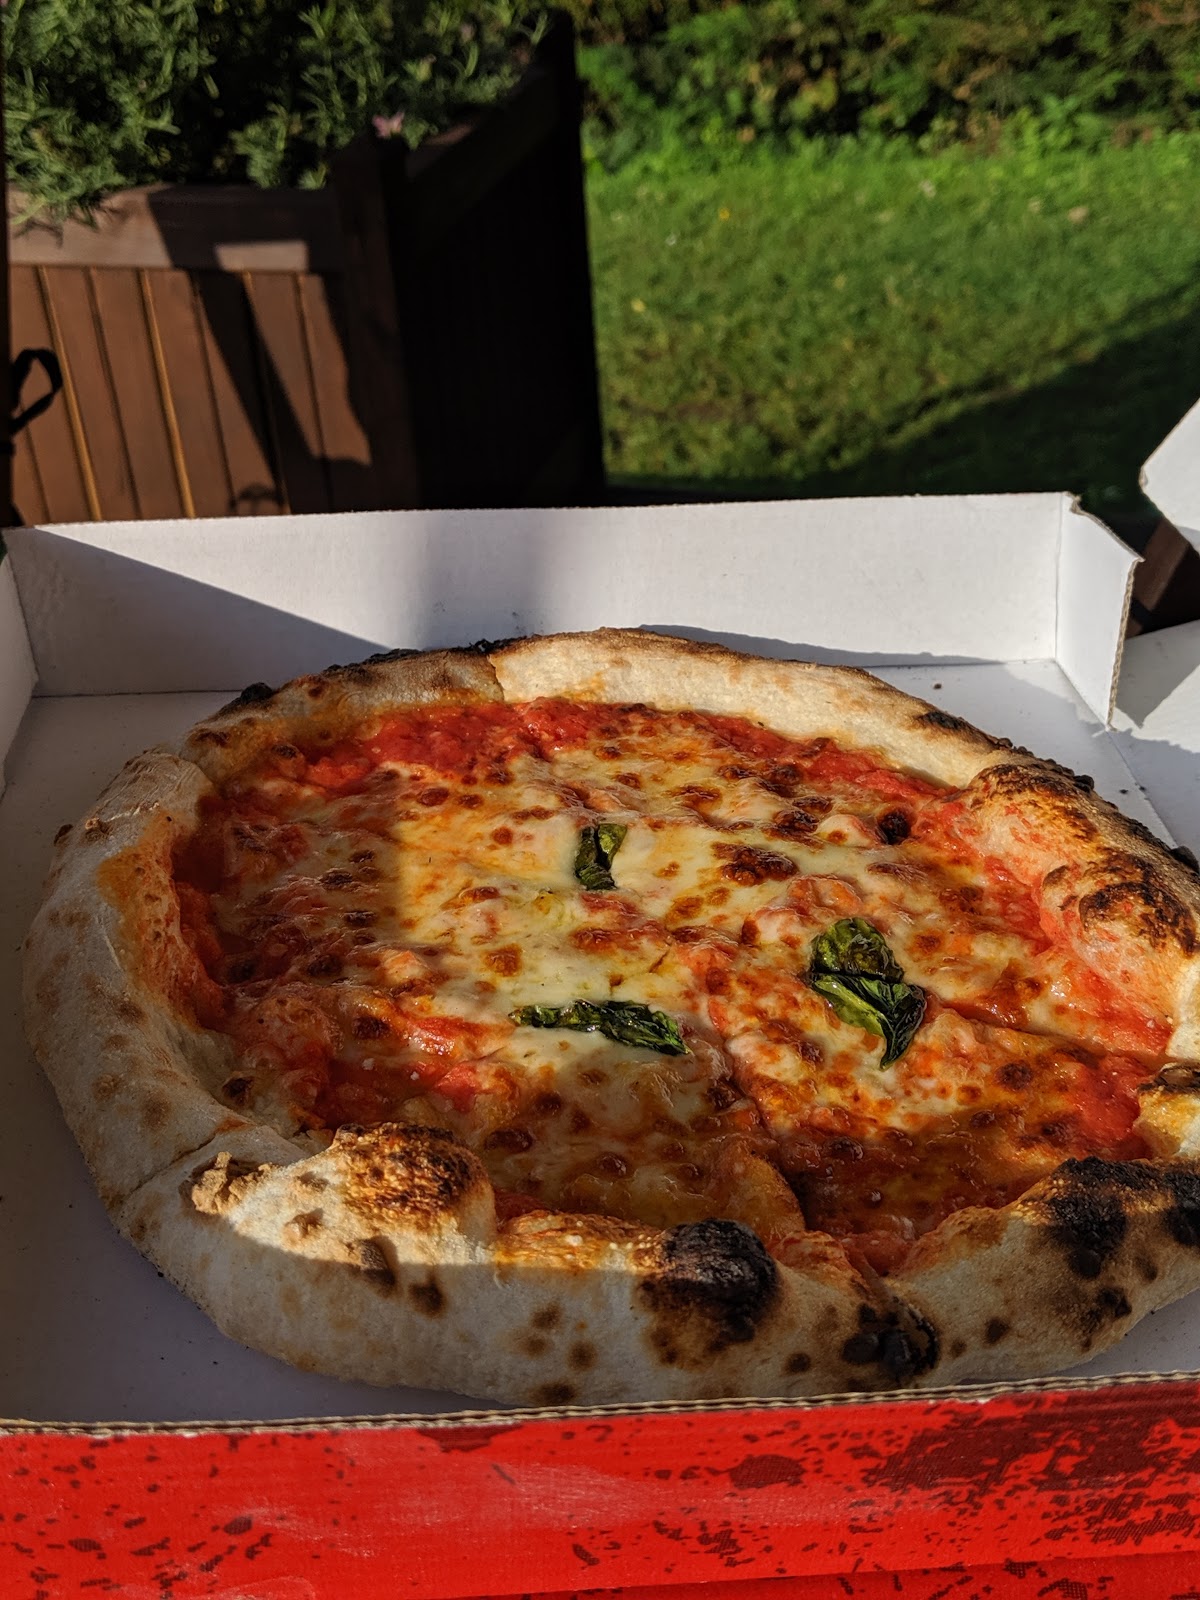 Ready Camp Horsley Review : Glamping near LEGOLAND and Chessington World of Adventures - pizza from the truck